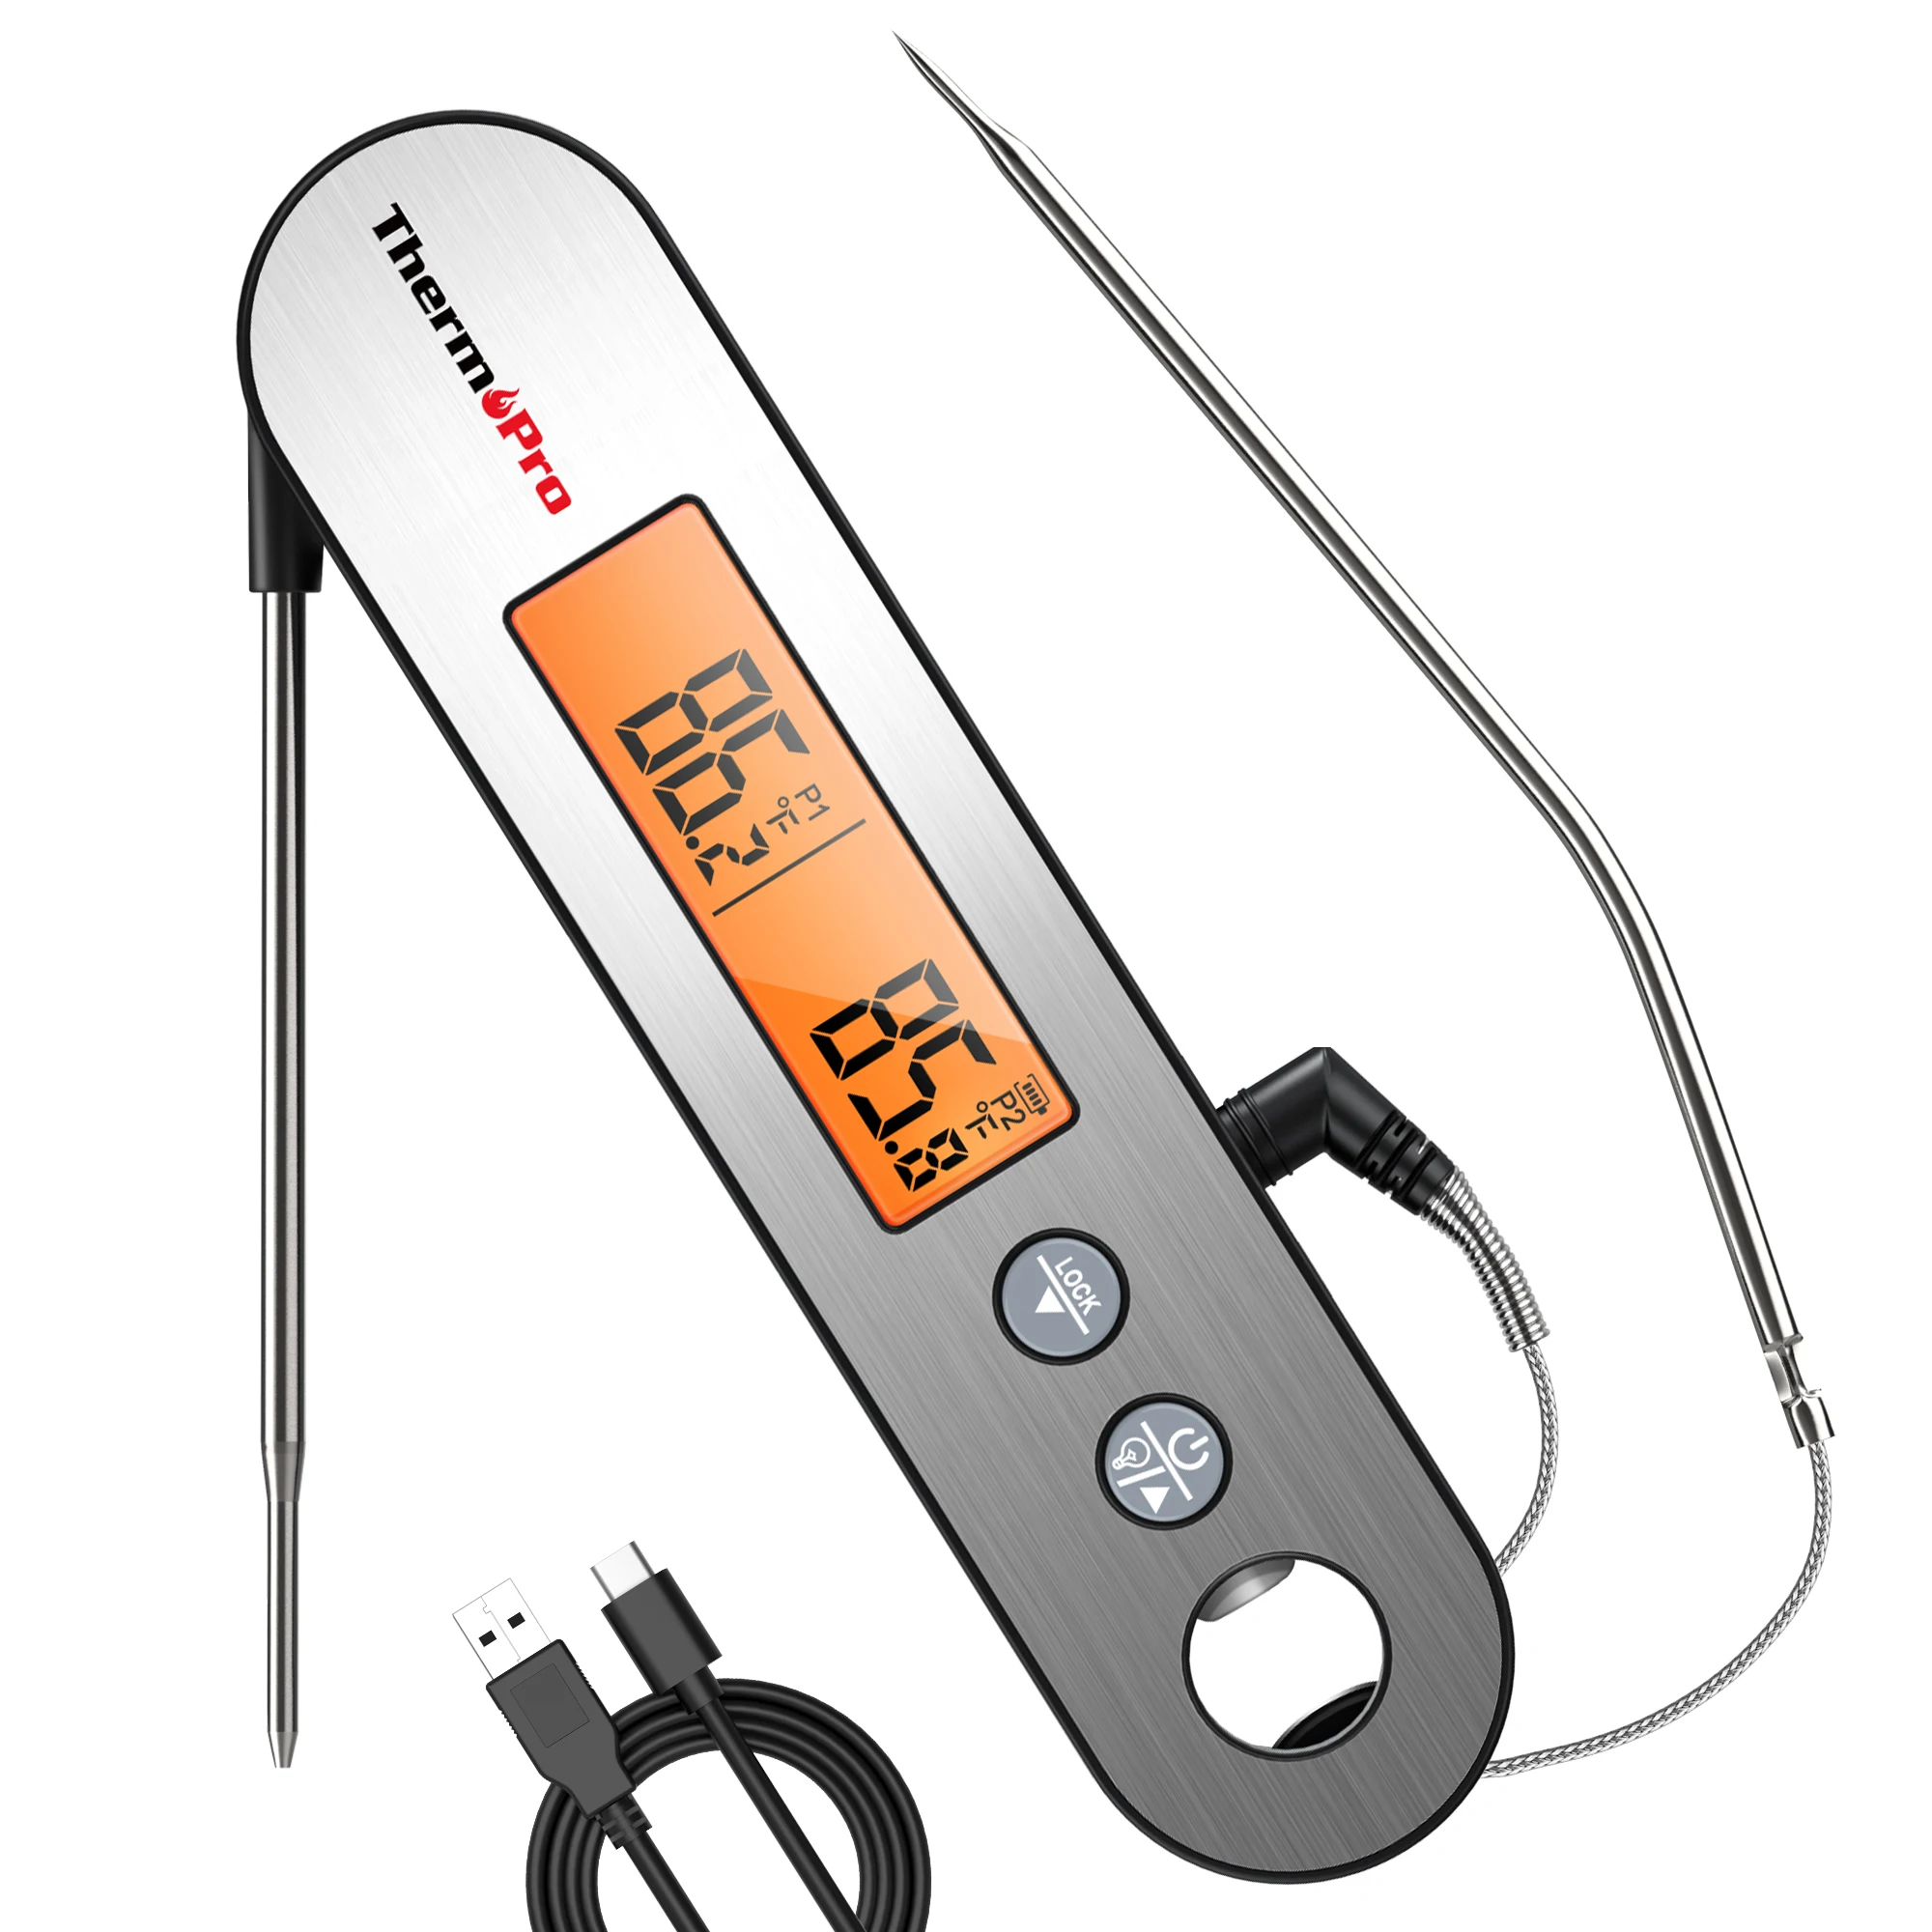 ThermoPro TP610 Digital Waterproof Meat Thermometer for Grilling